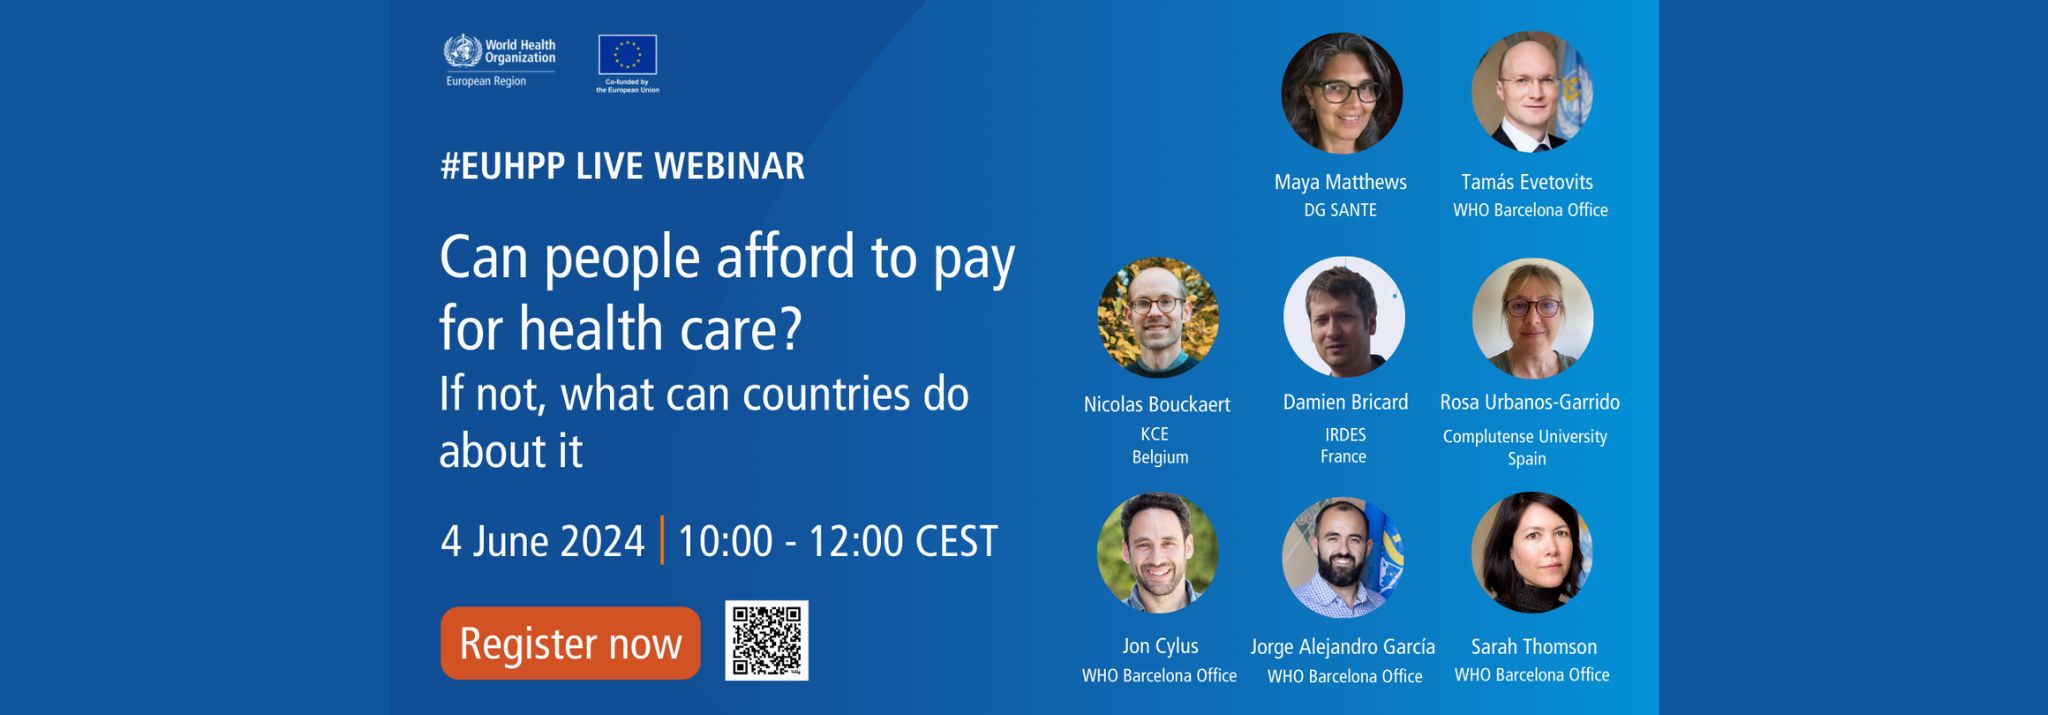 Live Webinar: Can people afford to pay for health care?